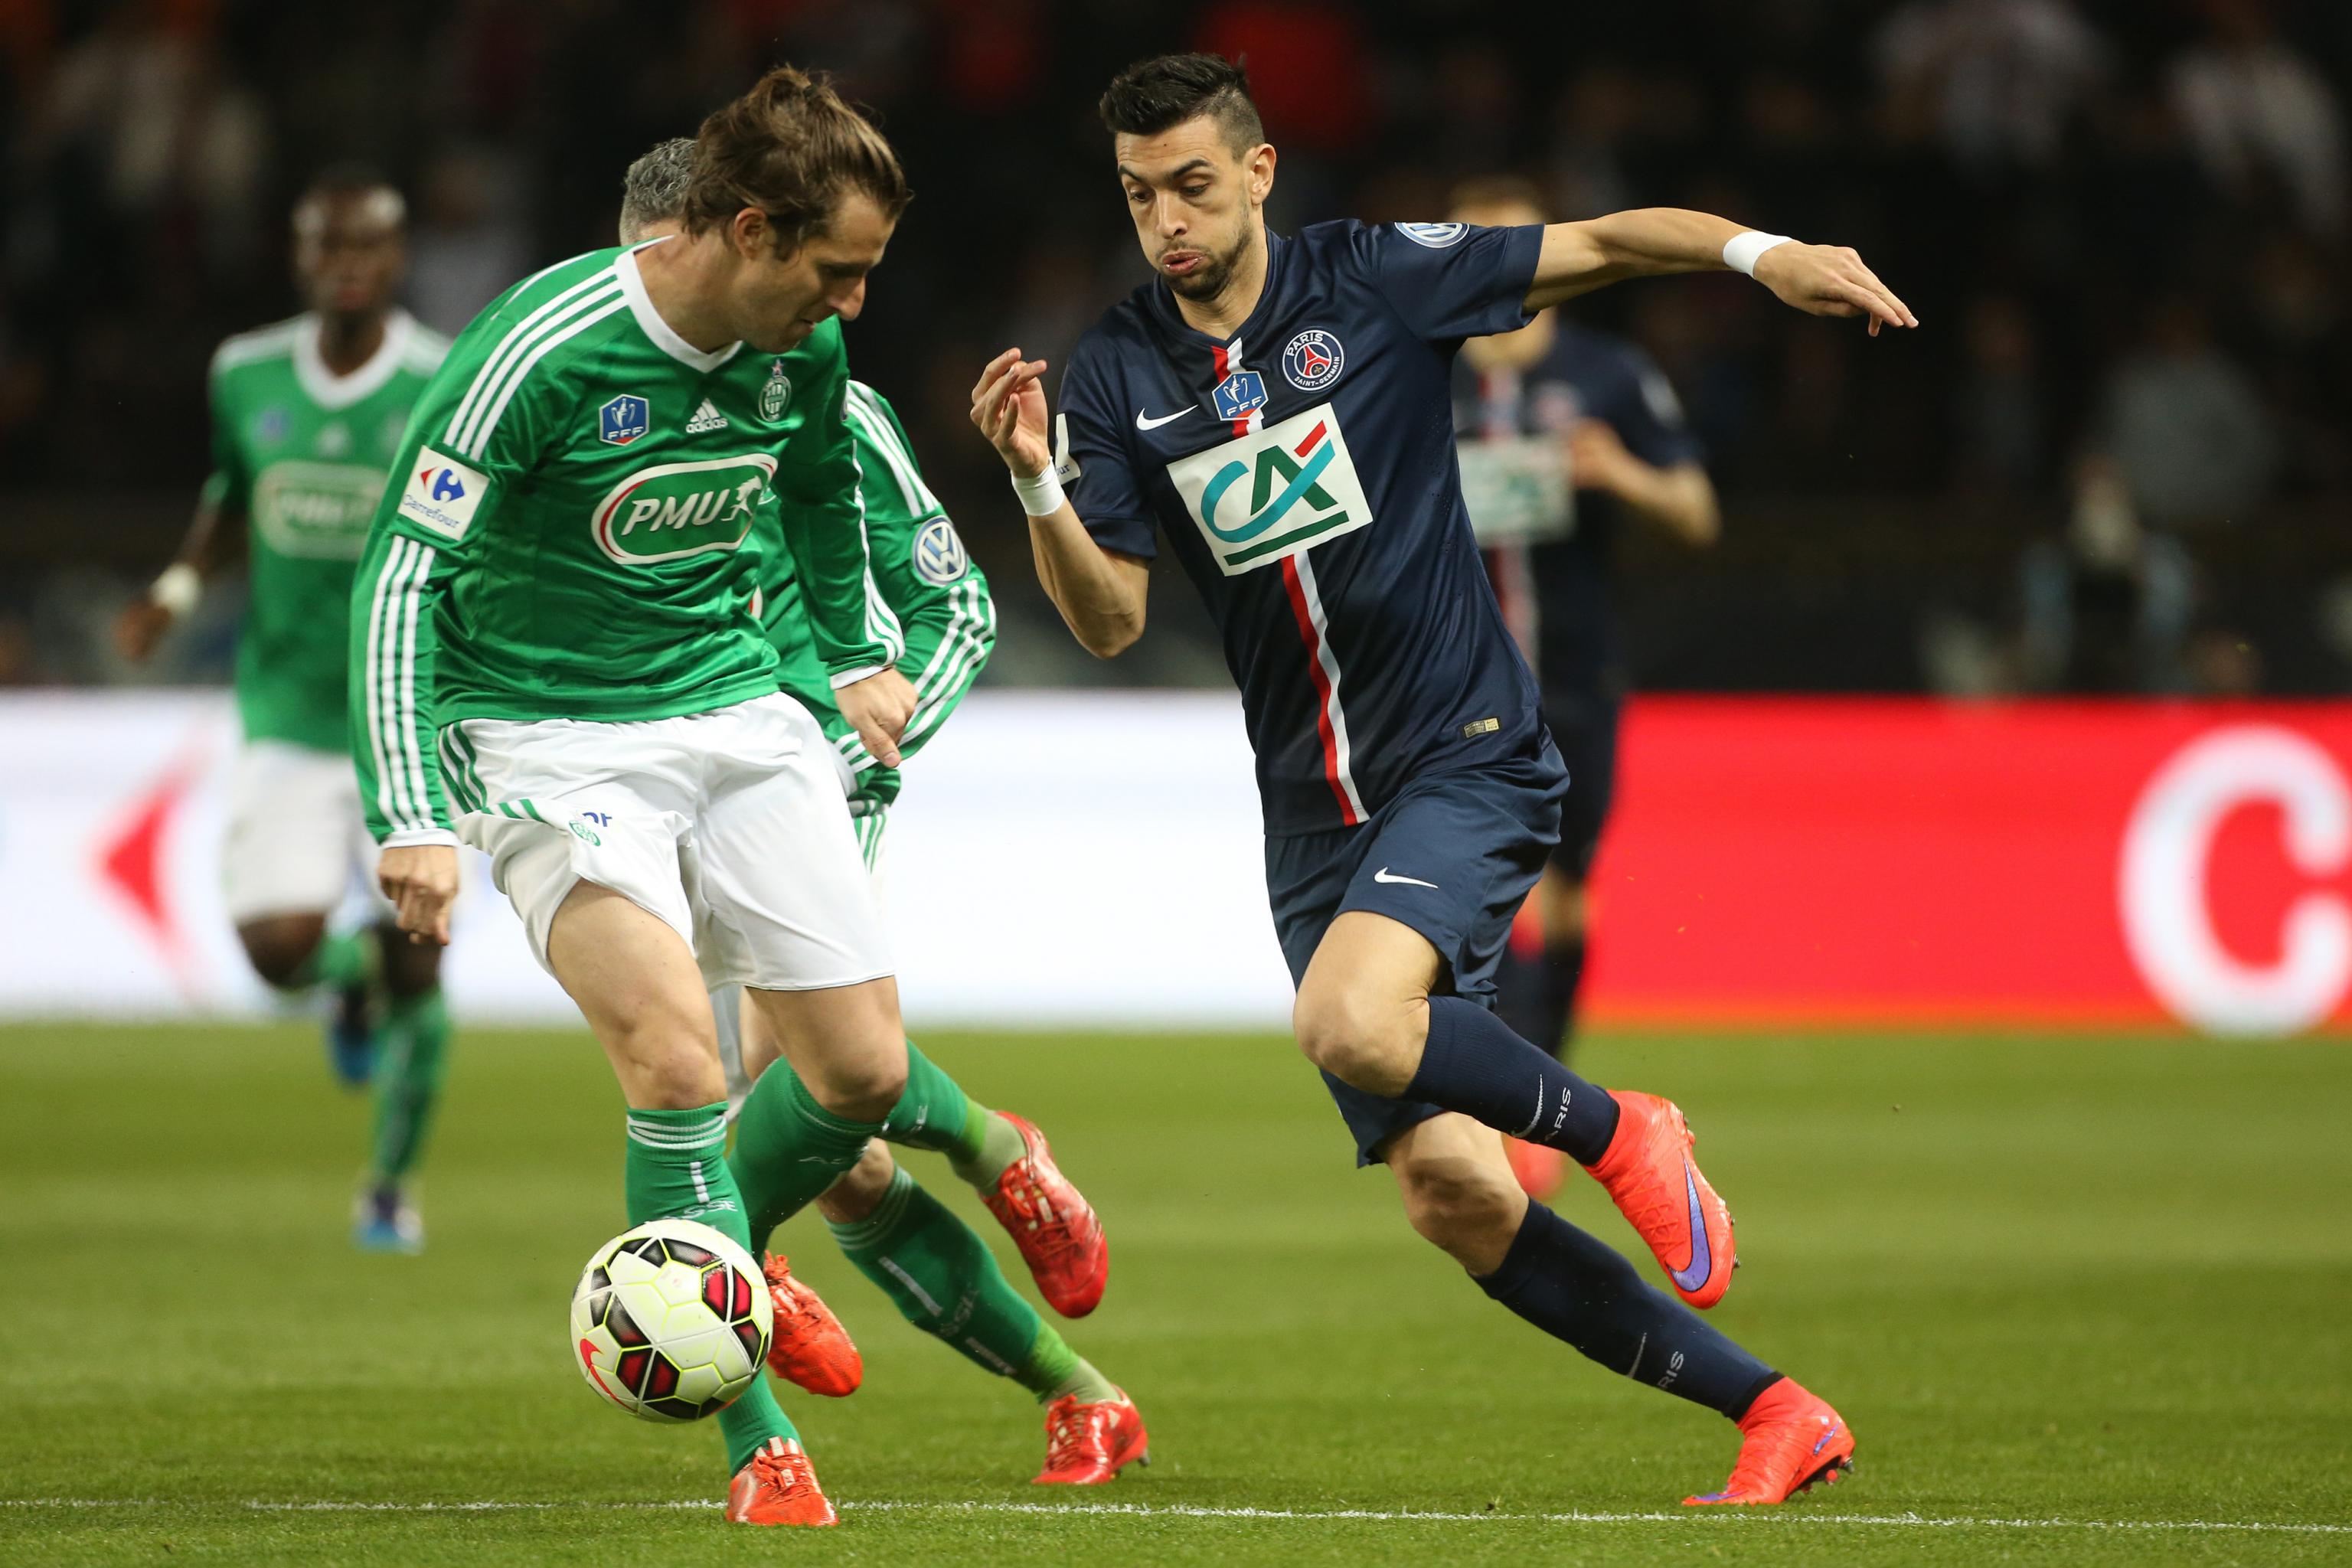 Daunting Match-Up for Saint-Étienne as Powerful PSG Travel to Geoffroy Stadium!